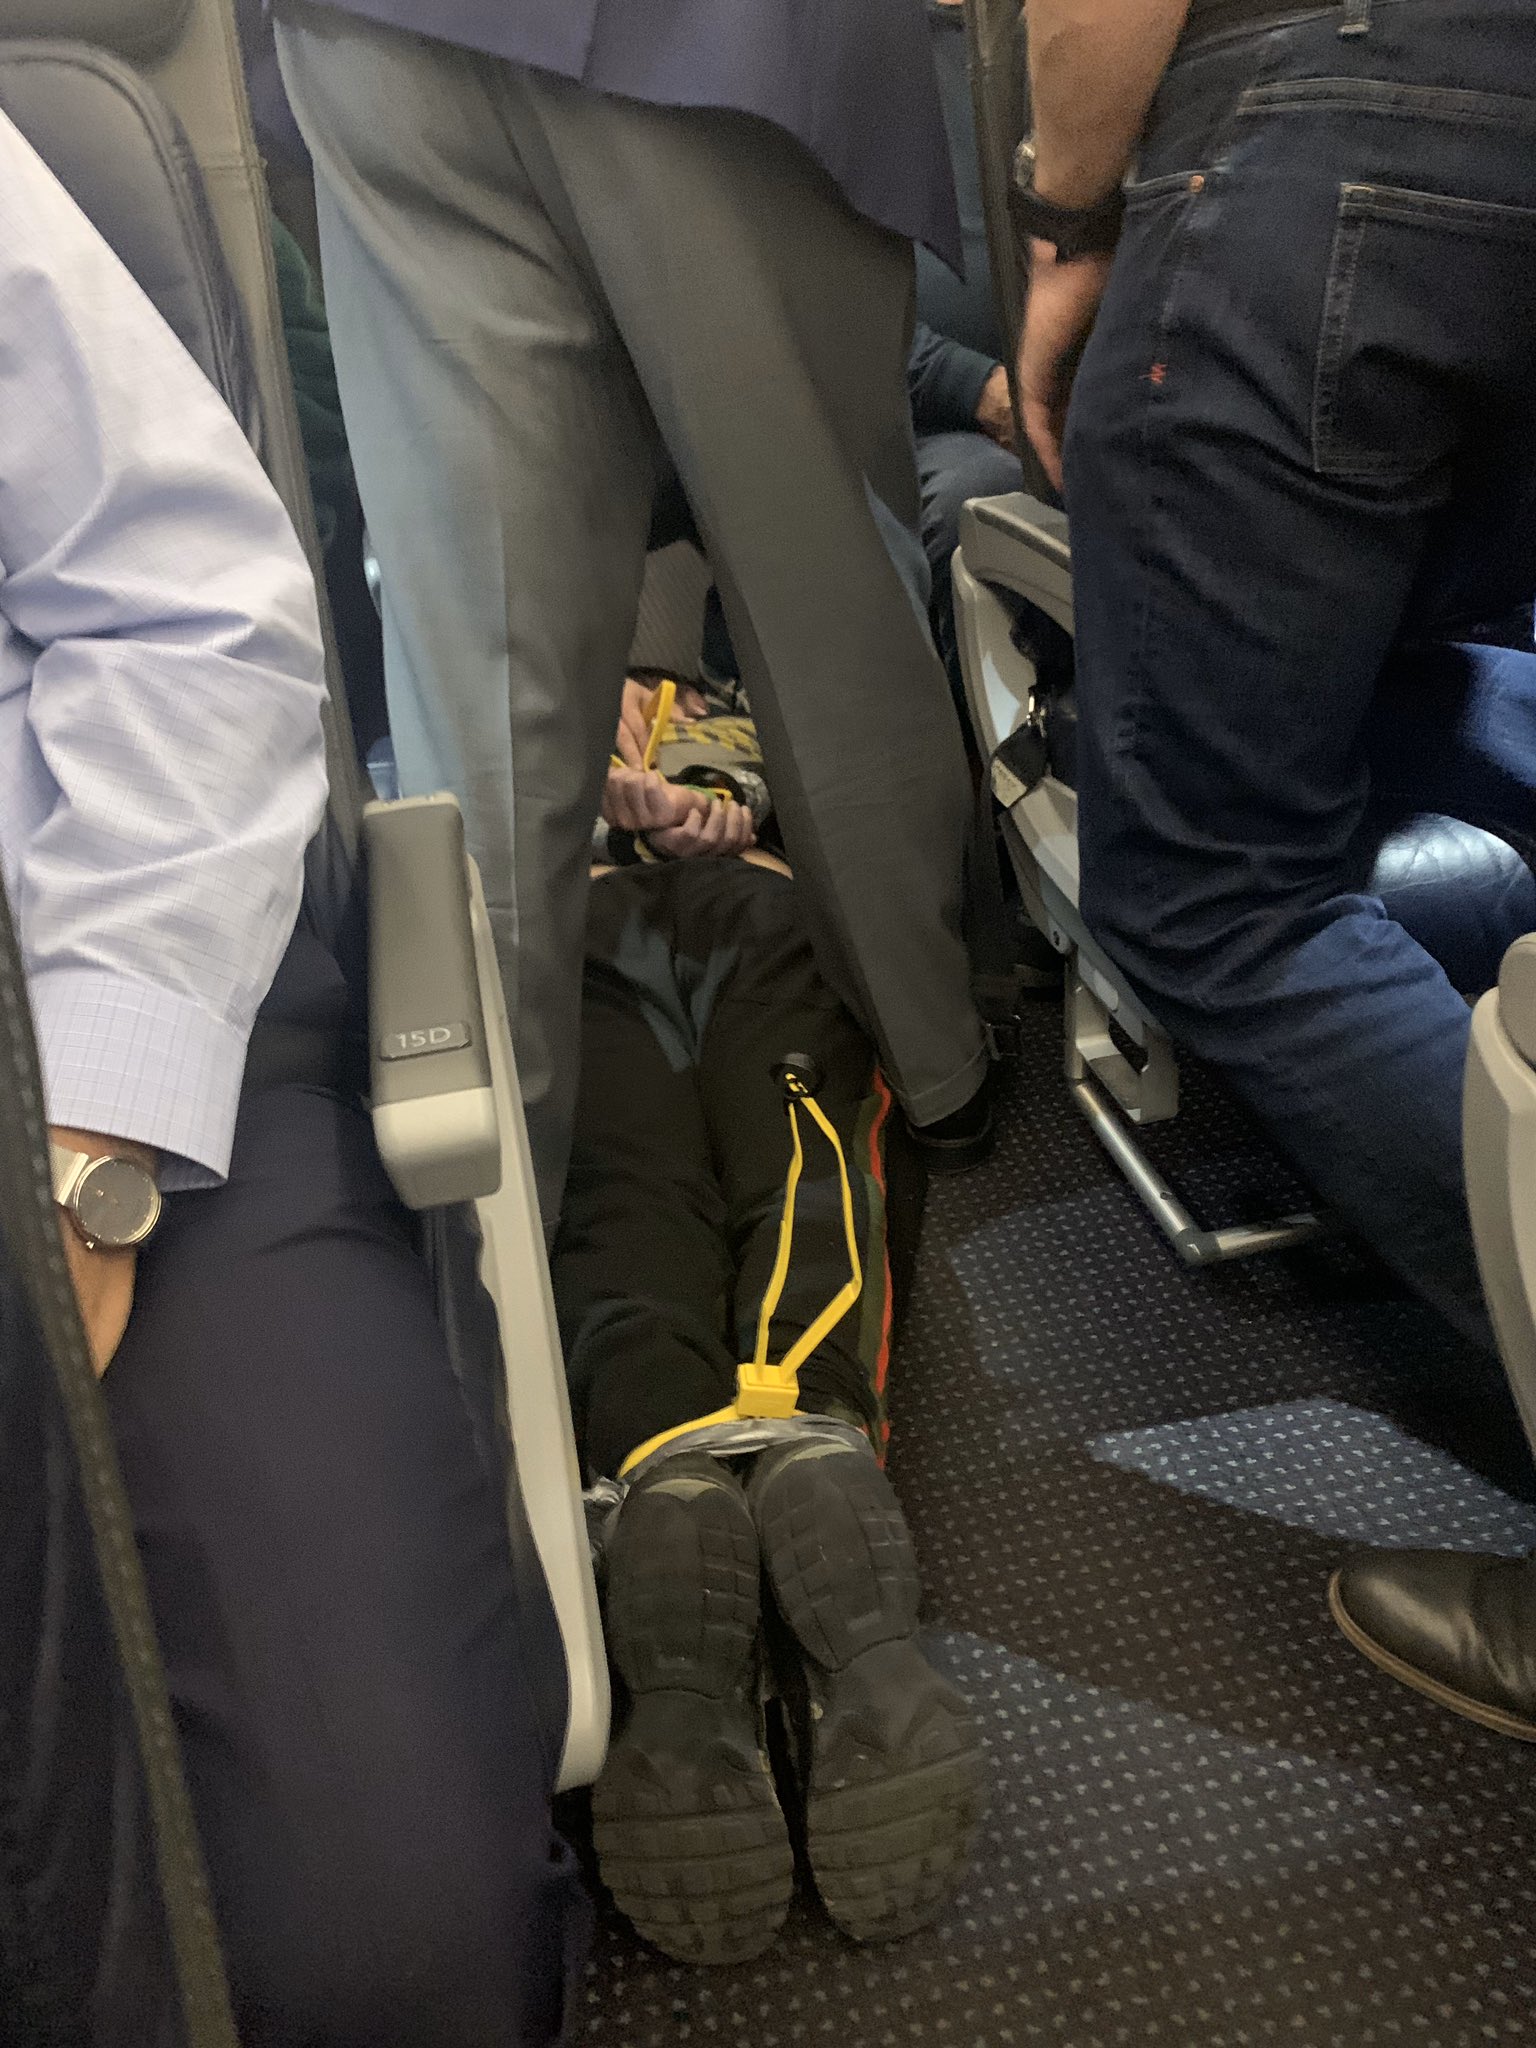 PHOTO: An unidentified passenger had to be removed from a plane after he allegedly tried to open a door midflight. The plane, bound for Dallas-Fort Worth from Chicago, made an emergency landing in St. Louis, March 4, 2020.